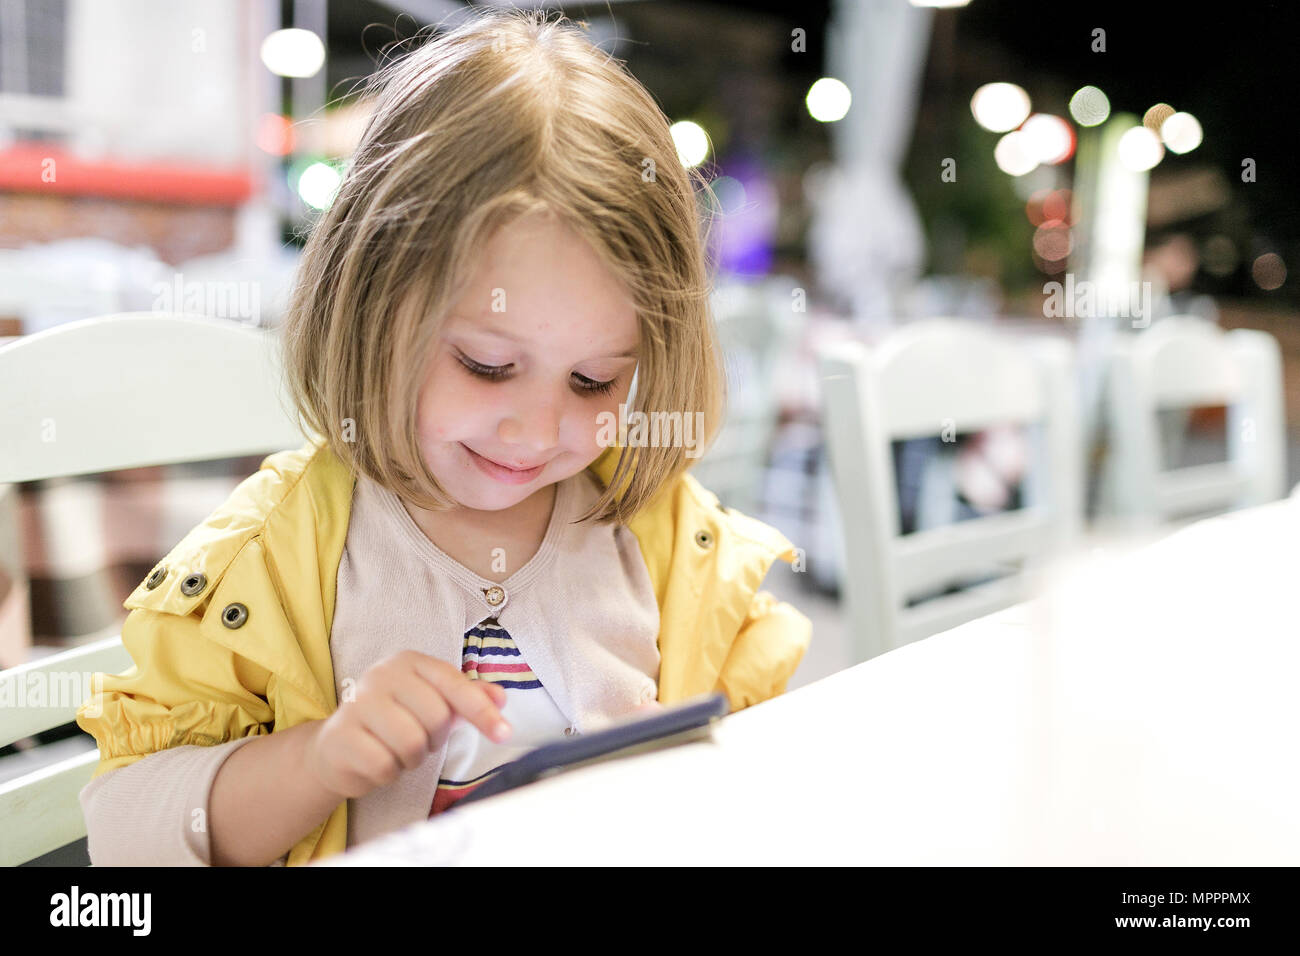 Portrait of smiling little girl sitting in a restaurant playing with smartphone Stock Photo